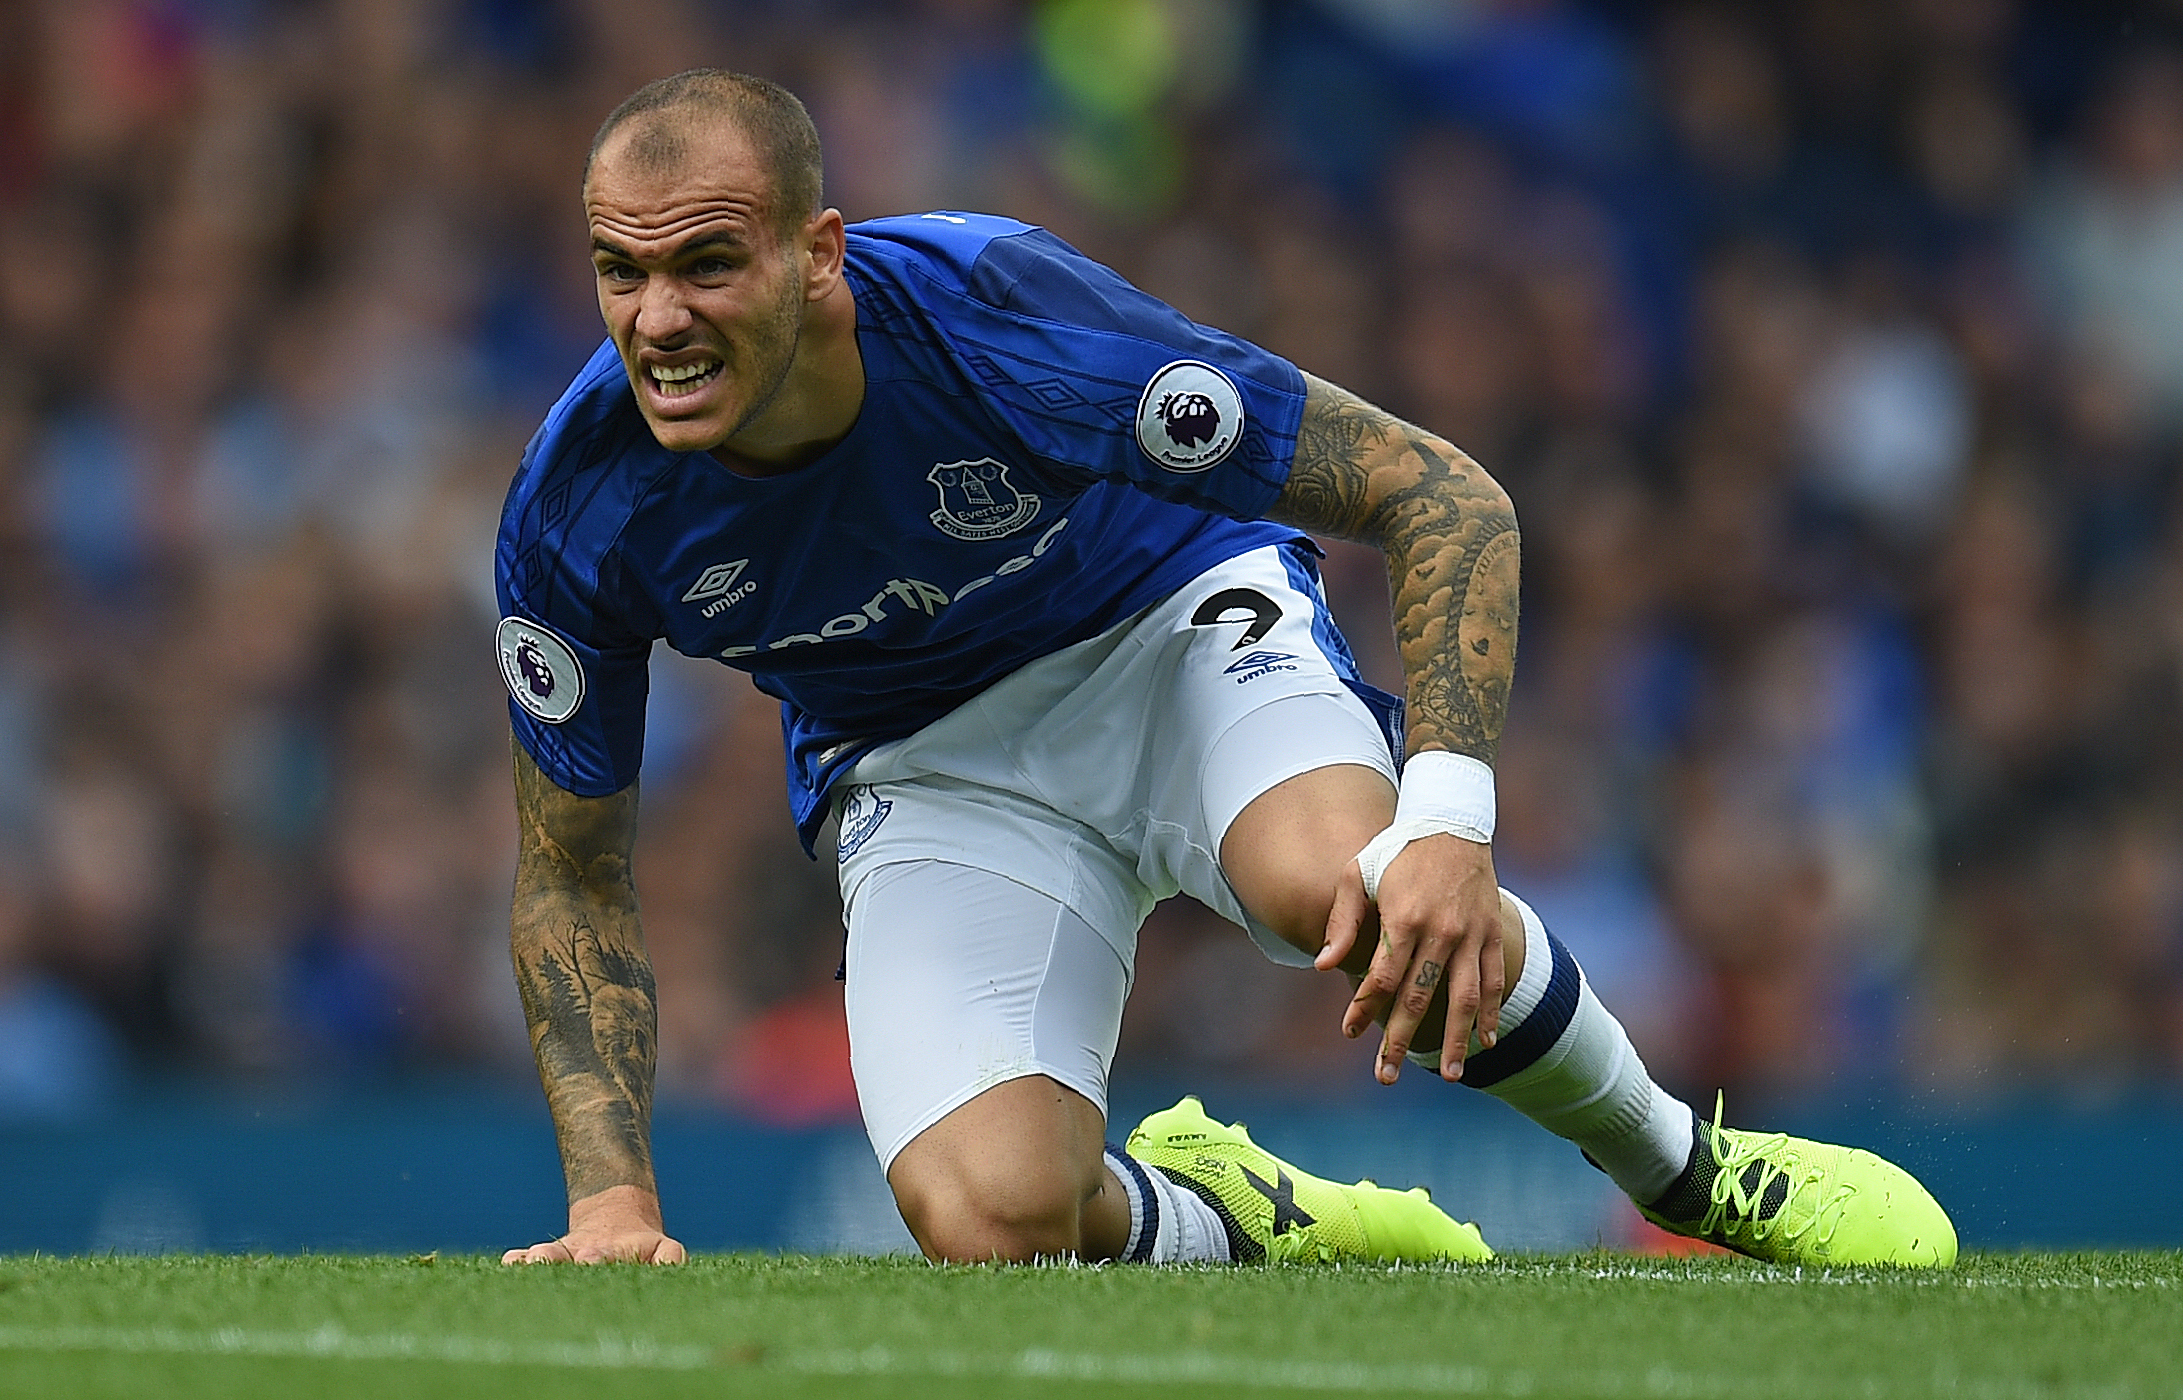 Everton's Spanish striker Sandro Ramirez reacts during the English Premier League football match between Everton and Stoke City at Goodison Park in Liverpool, north west England on August 12, 2017. / AFP PHOTO / Oli SCARFF / RESTRICTED TO EDITORIAL USE. No use with unauthorized audio, video, data, fixture lists, club/league logos or 'live' services. Online in-match use limited to 75 images, no video emulation. No use in betting, games or single club/league/player publications.  /         (Photo credit should read OLI SCARFF/AFP/Getty Images)